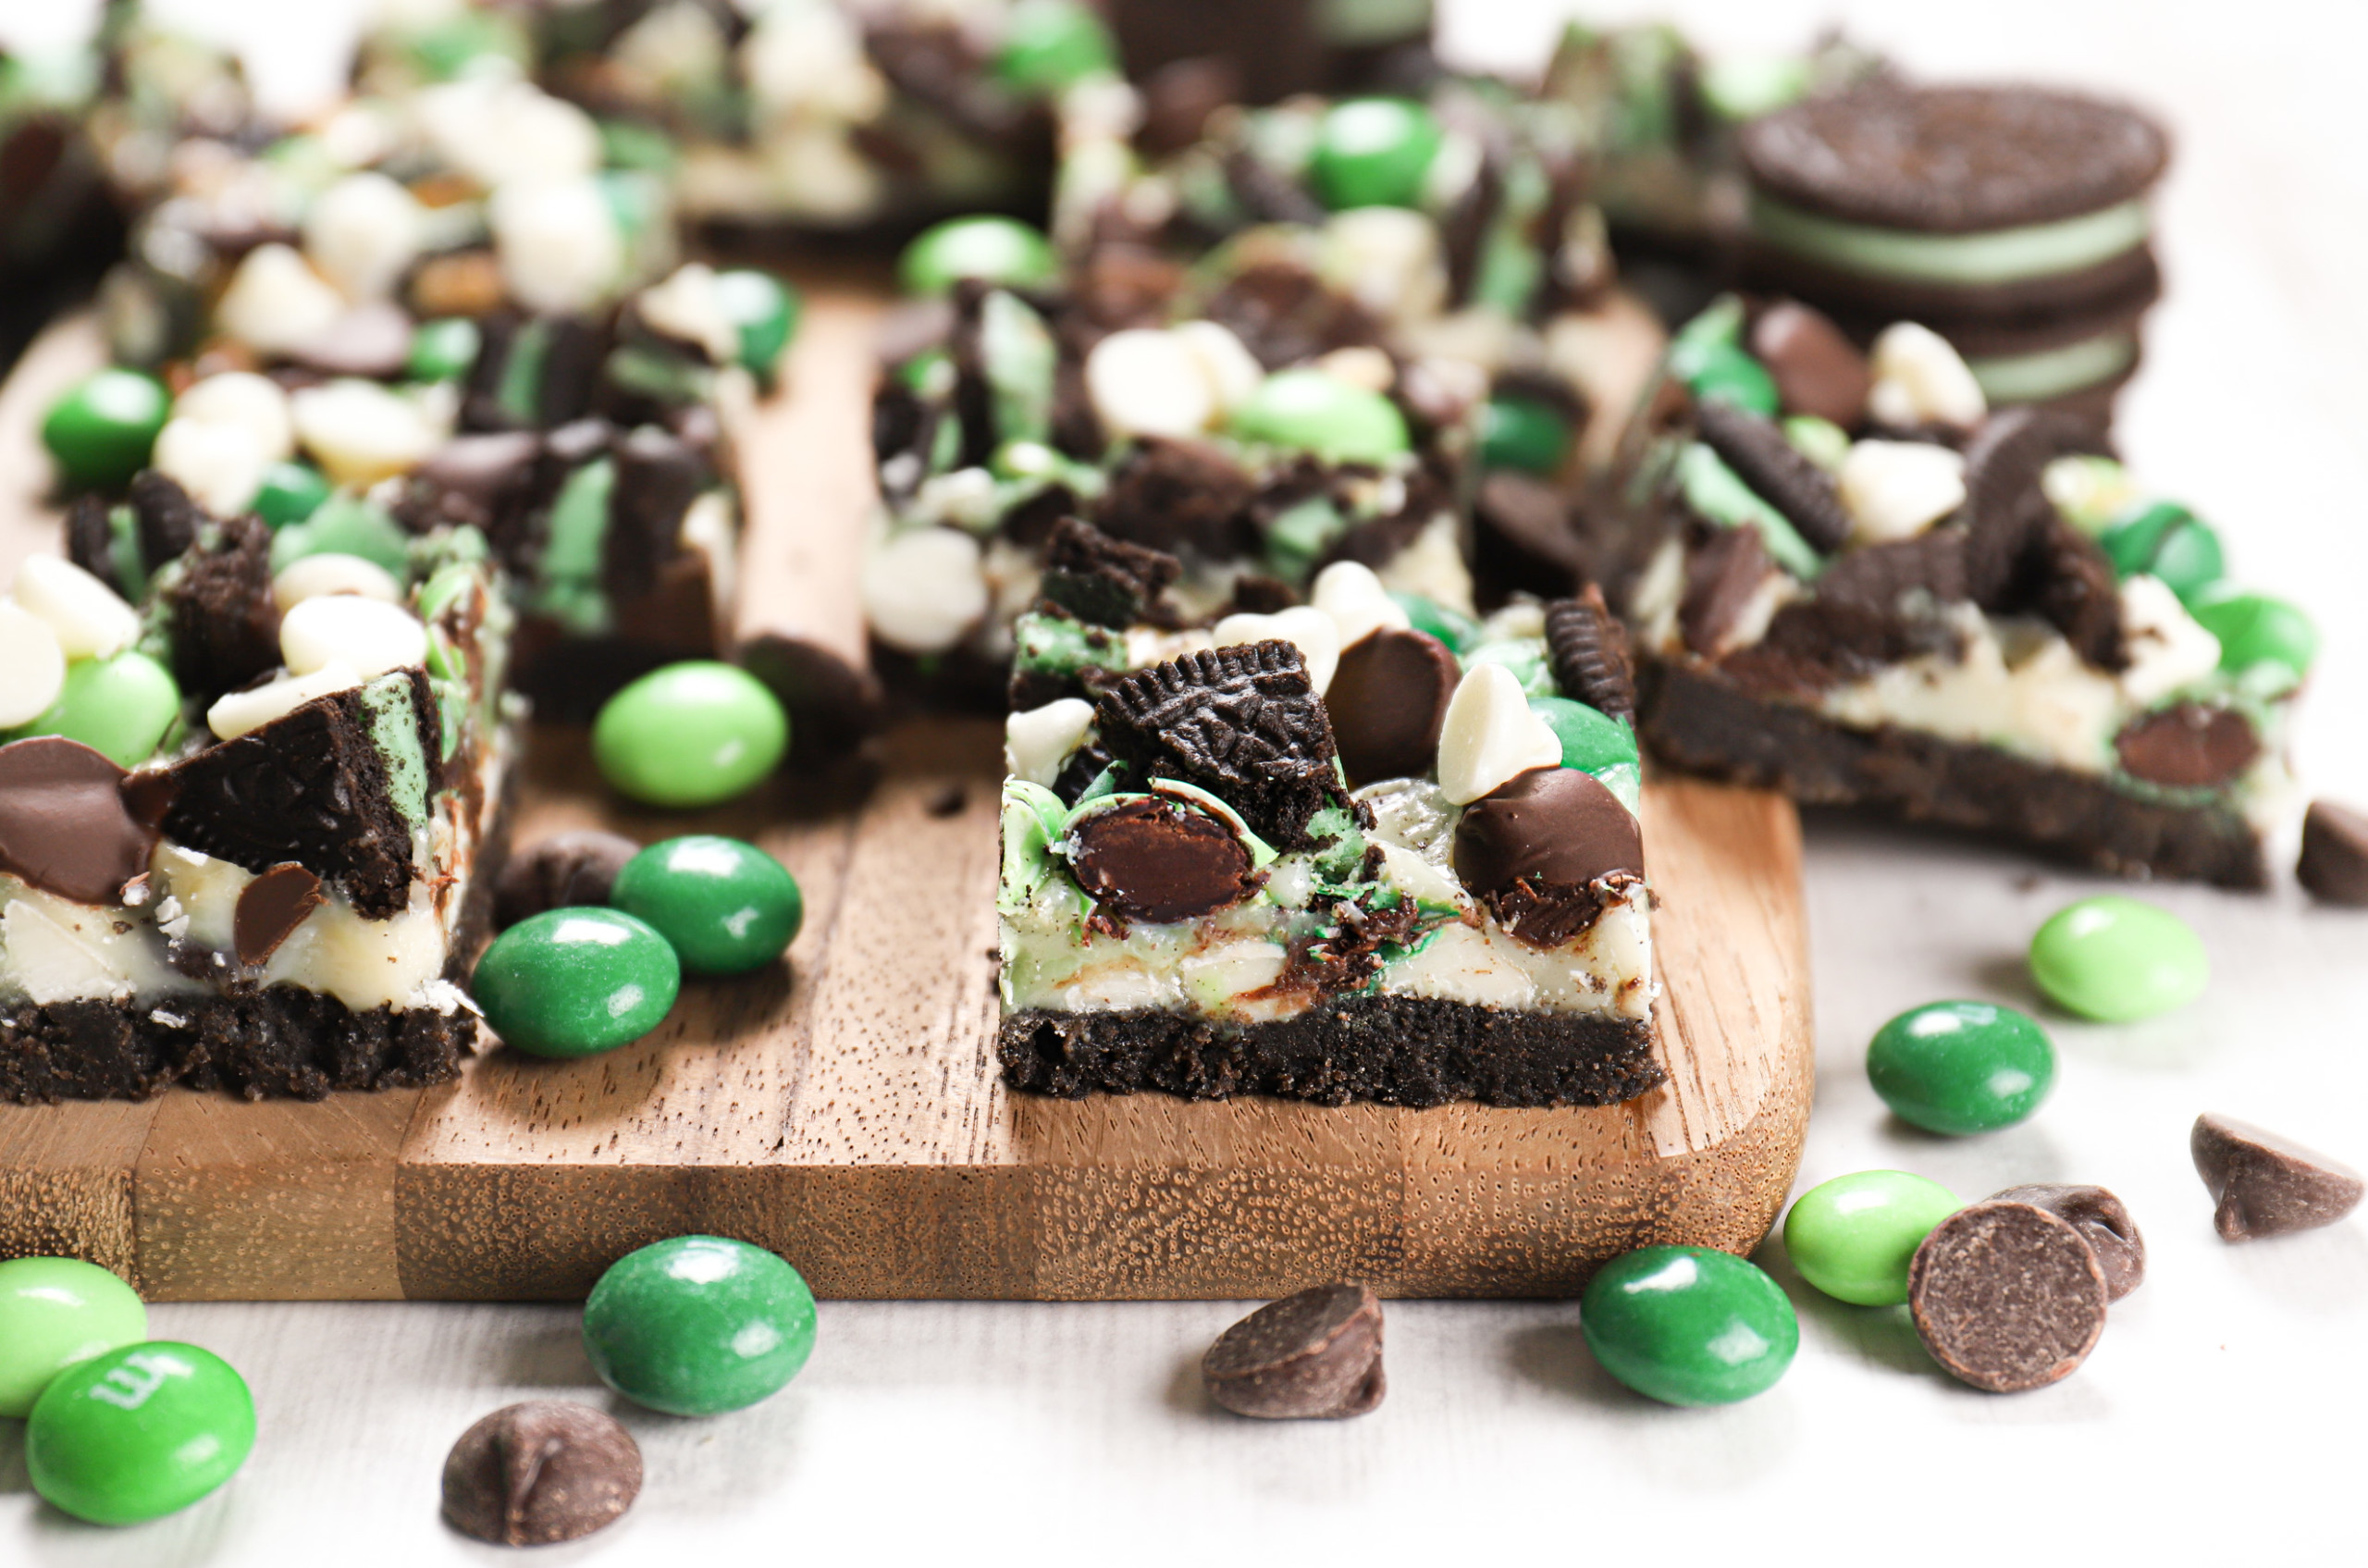 Side view of a mint chocolate seven layer bar on a wooden cutting board with more bars in the background.